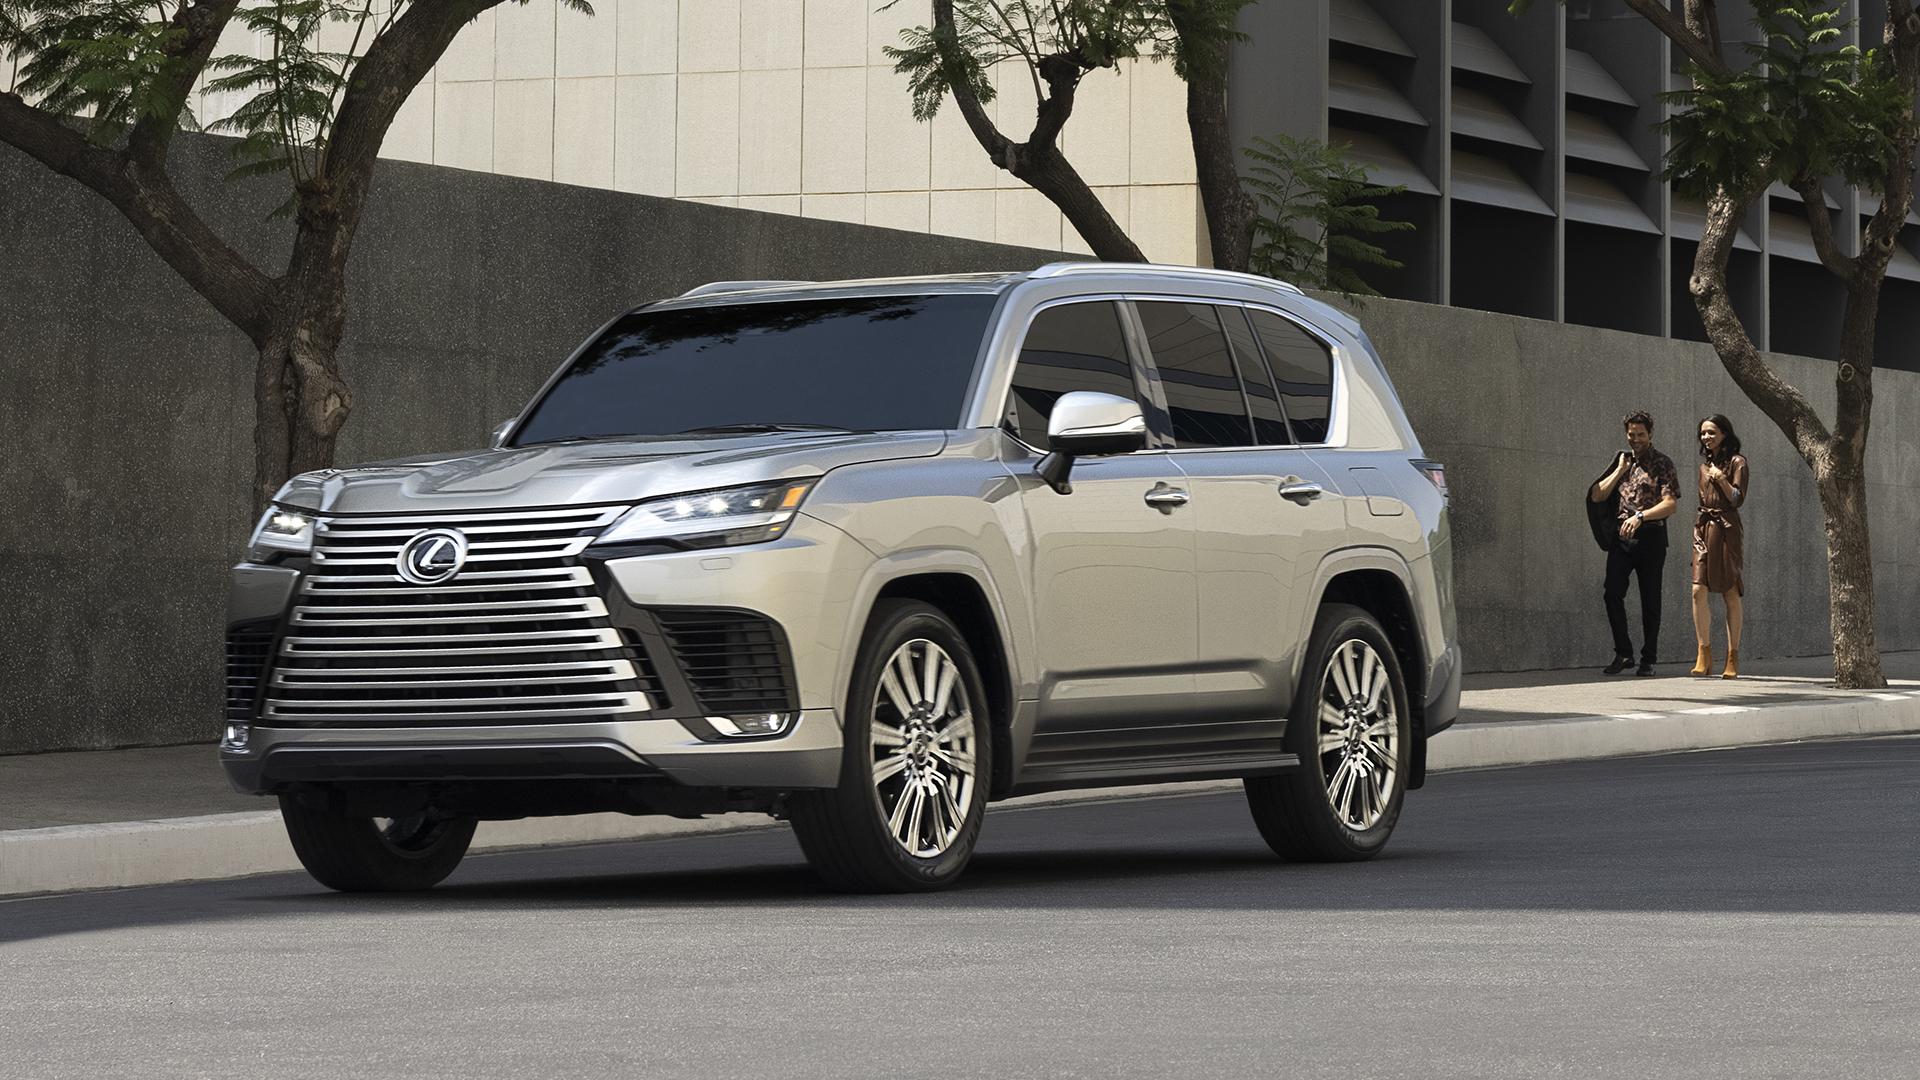 The Lexus LX 600 is based on its closely related counterpart, the Toyota Land Cruiser.